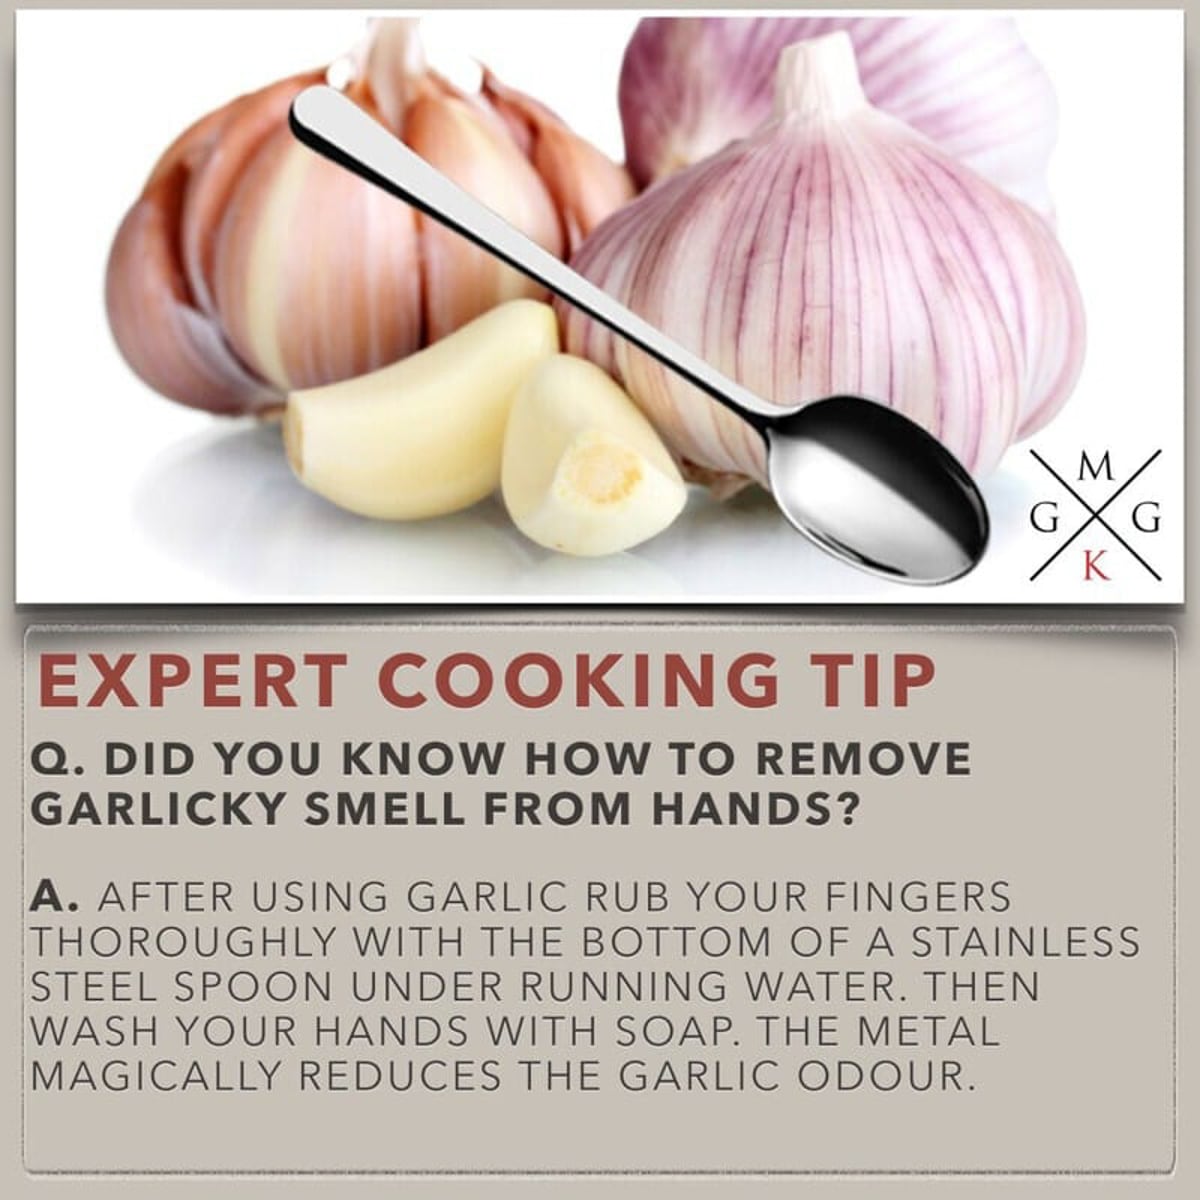 Did You Know How To Remove Garlicky Smell From Hands